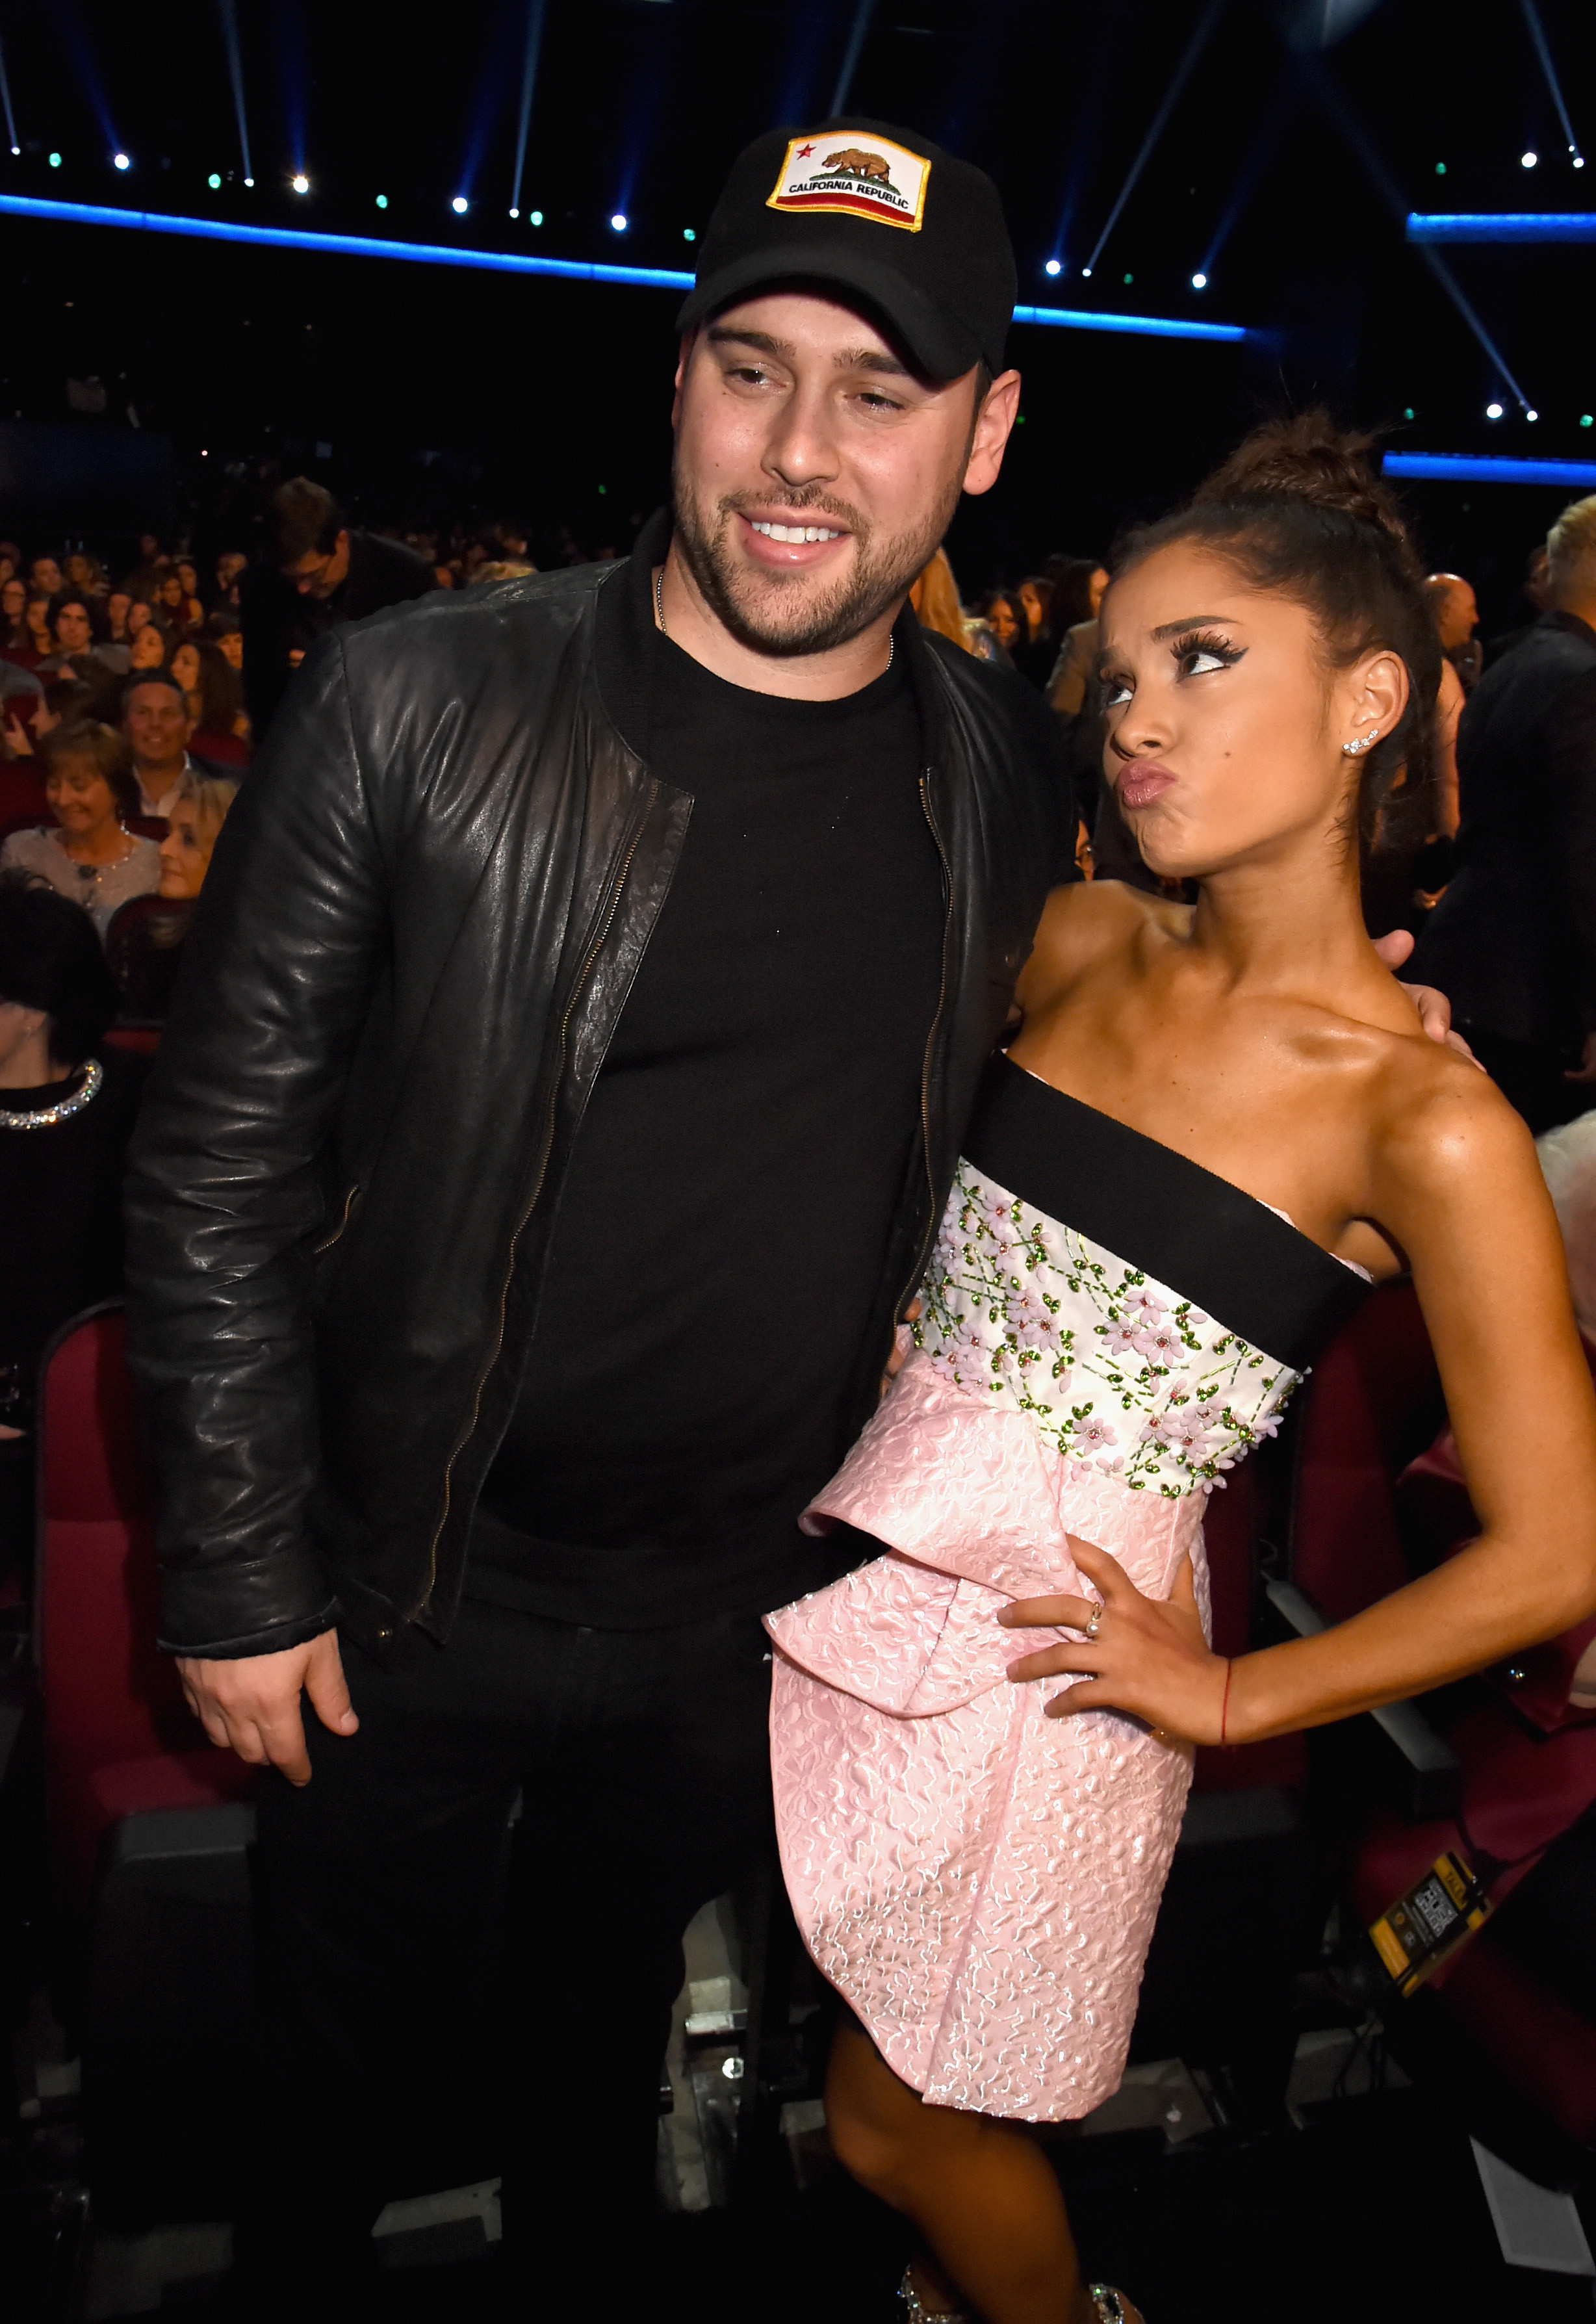 A close-up of Scooter and Ariana at a public event